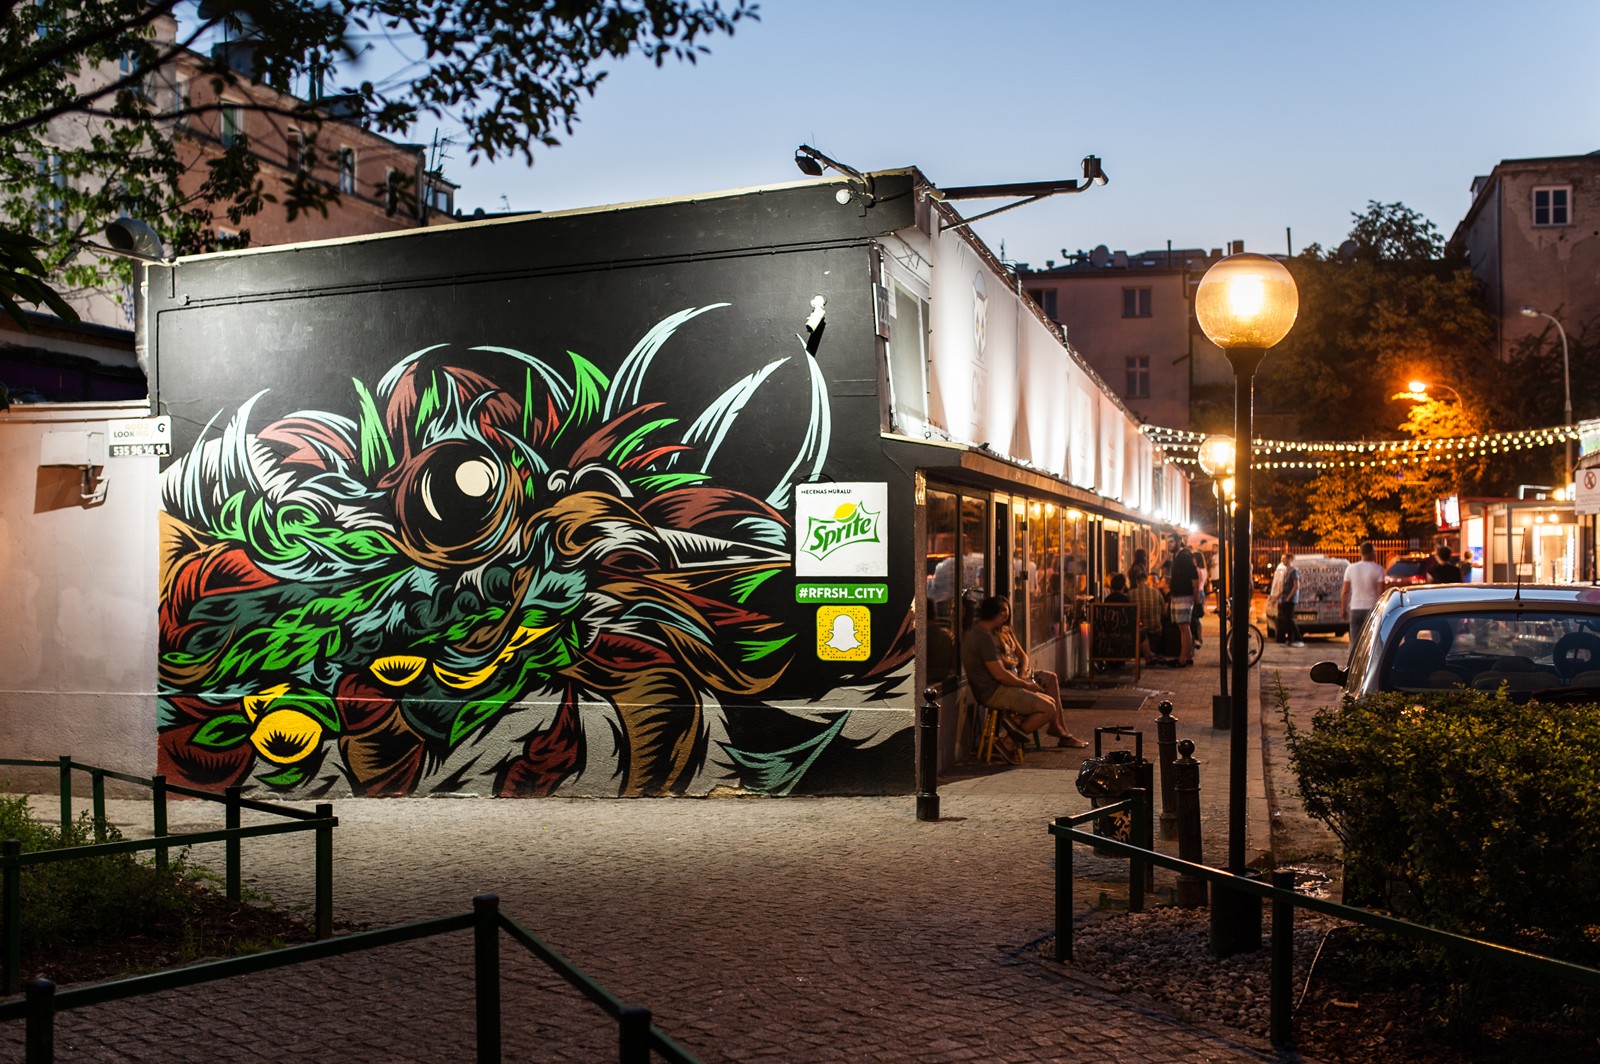 Pubs at Warsaw’s pavilions with a hand painted advertising mural by Swanski for Sprite | #RFRSH_CITY | Portfolio